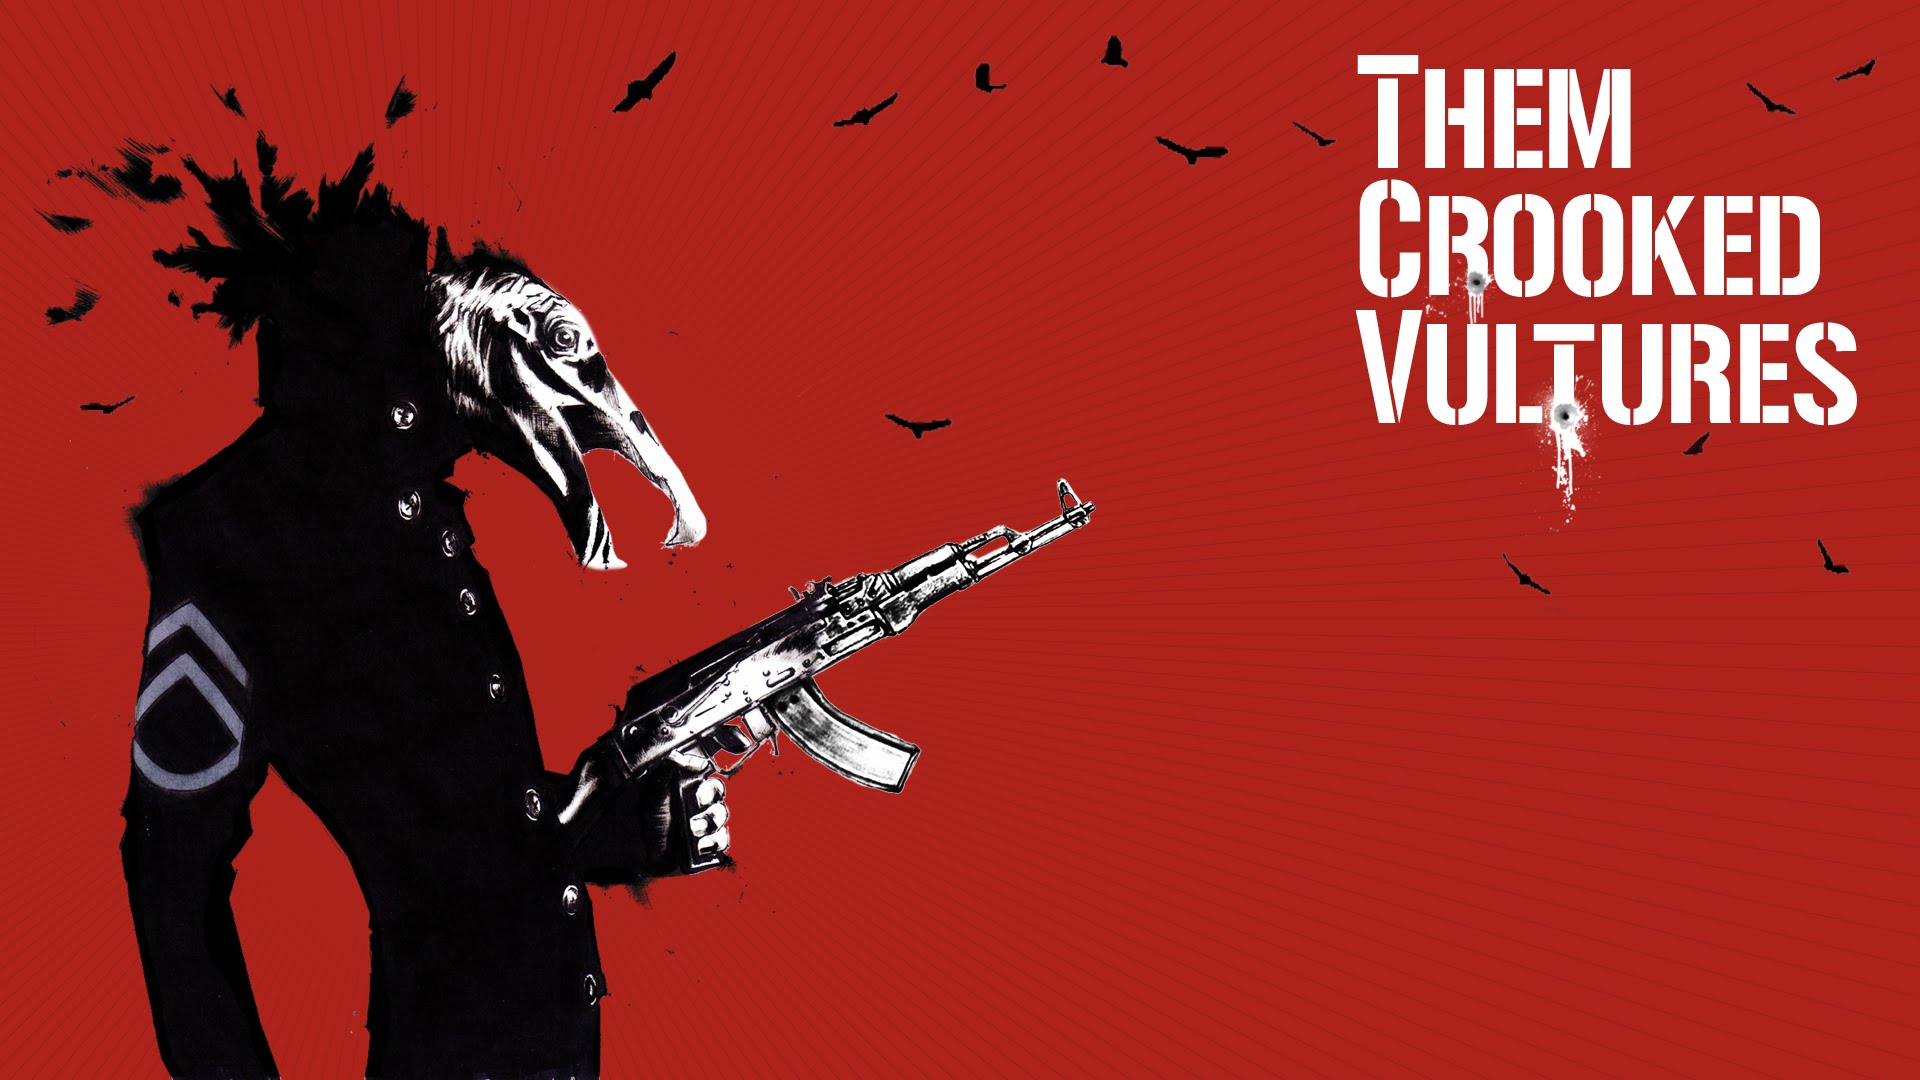 Them Crooked Vultures #1